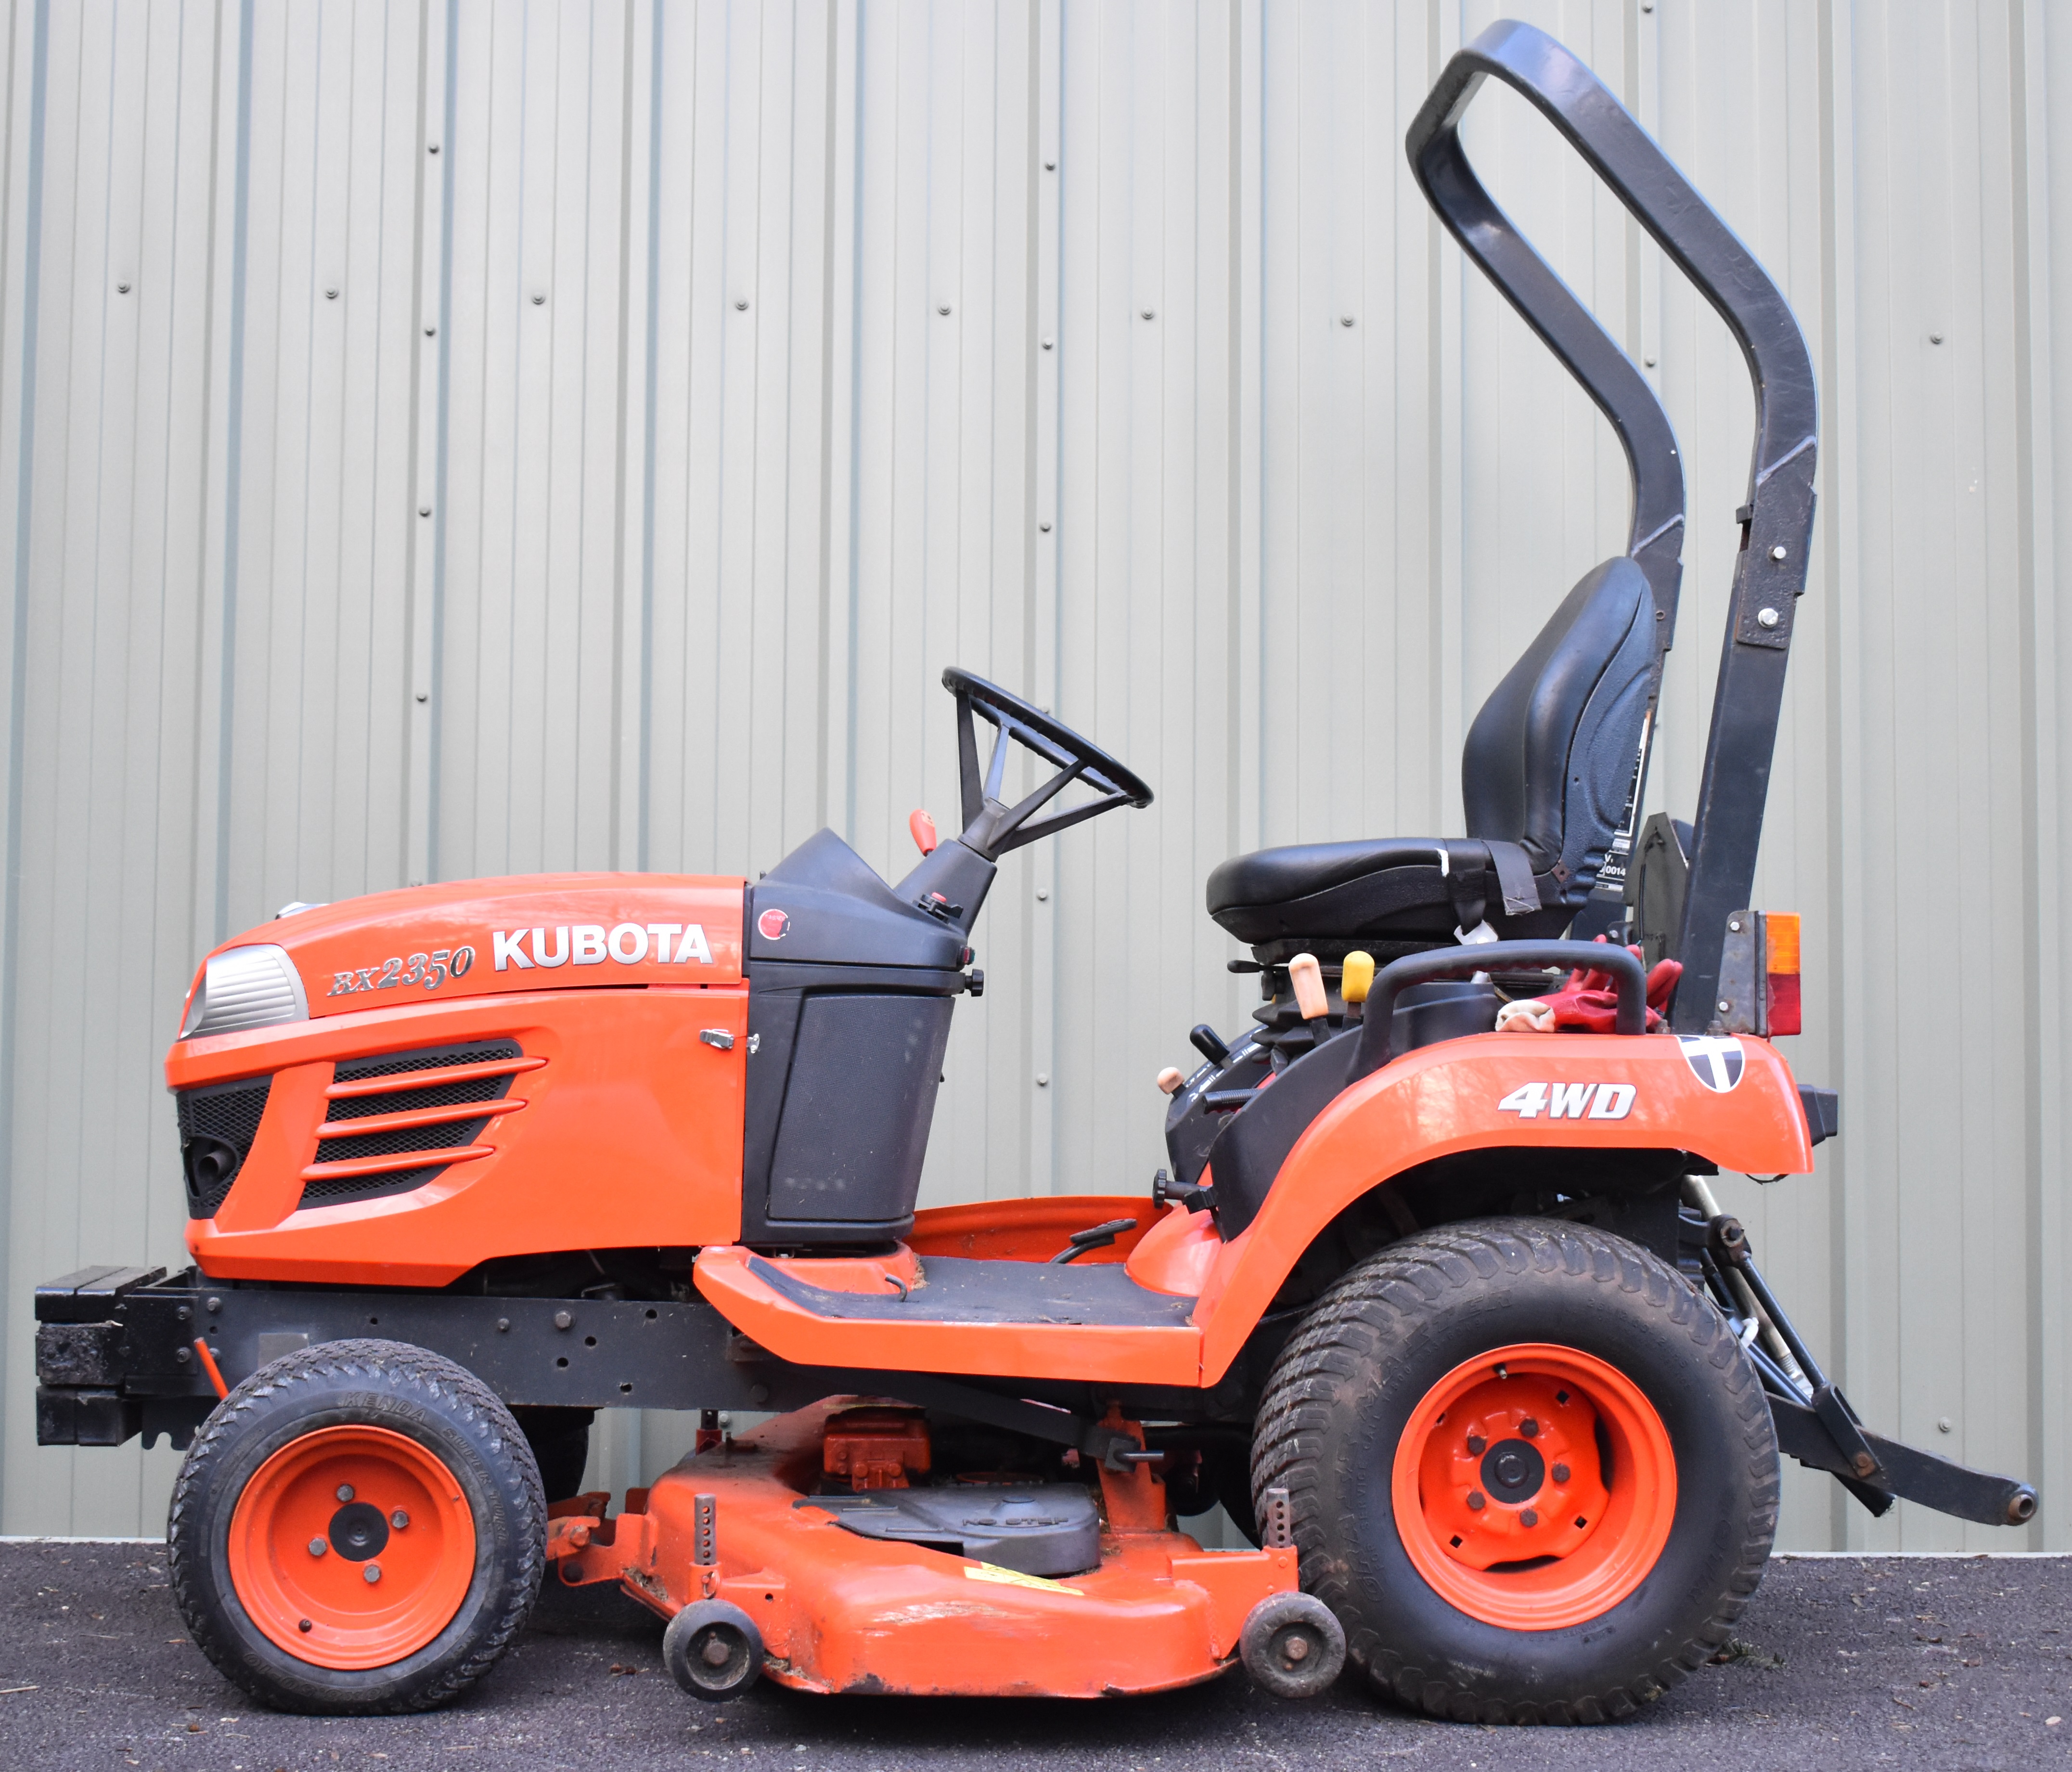 Kubota BX2350 mini tractor mower with three point linkage, power take off (PTO), hydraulics, - Image 2 of 17